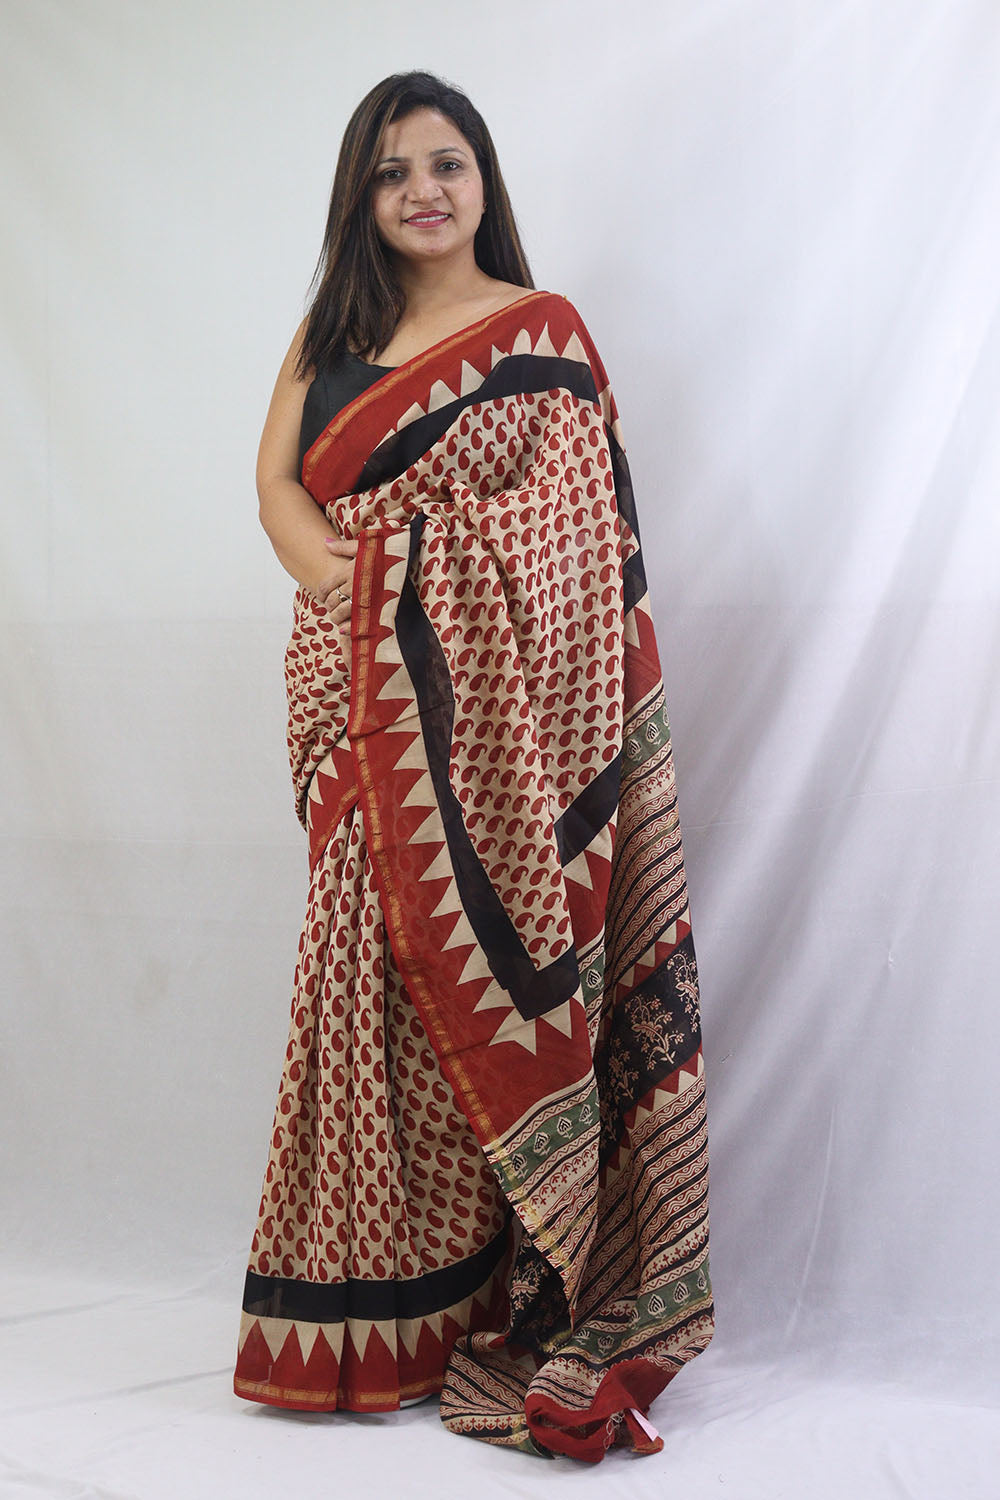 Stunning Multicolor Block Printed Chanderi Silk Saree - Perfect for Any Occasion! - Luxurion World